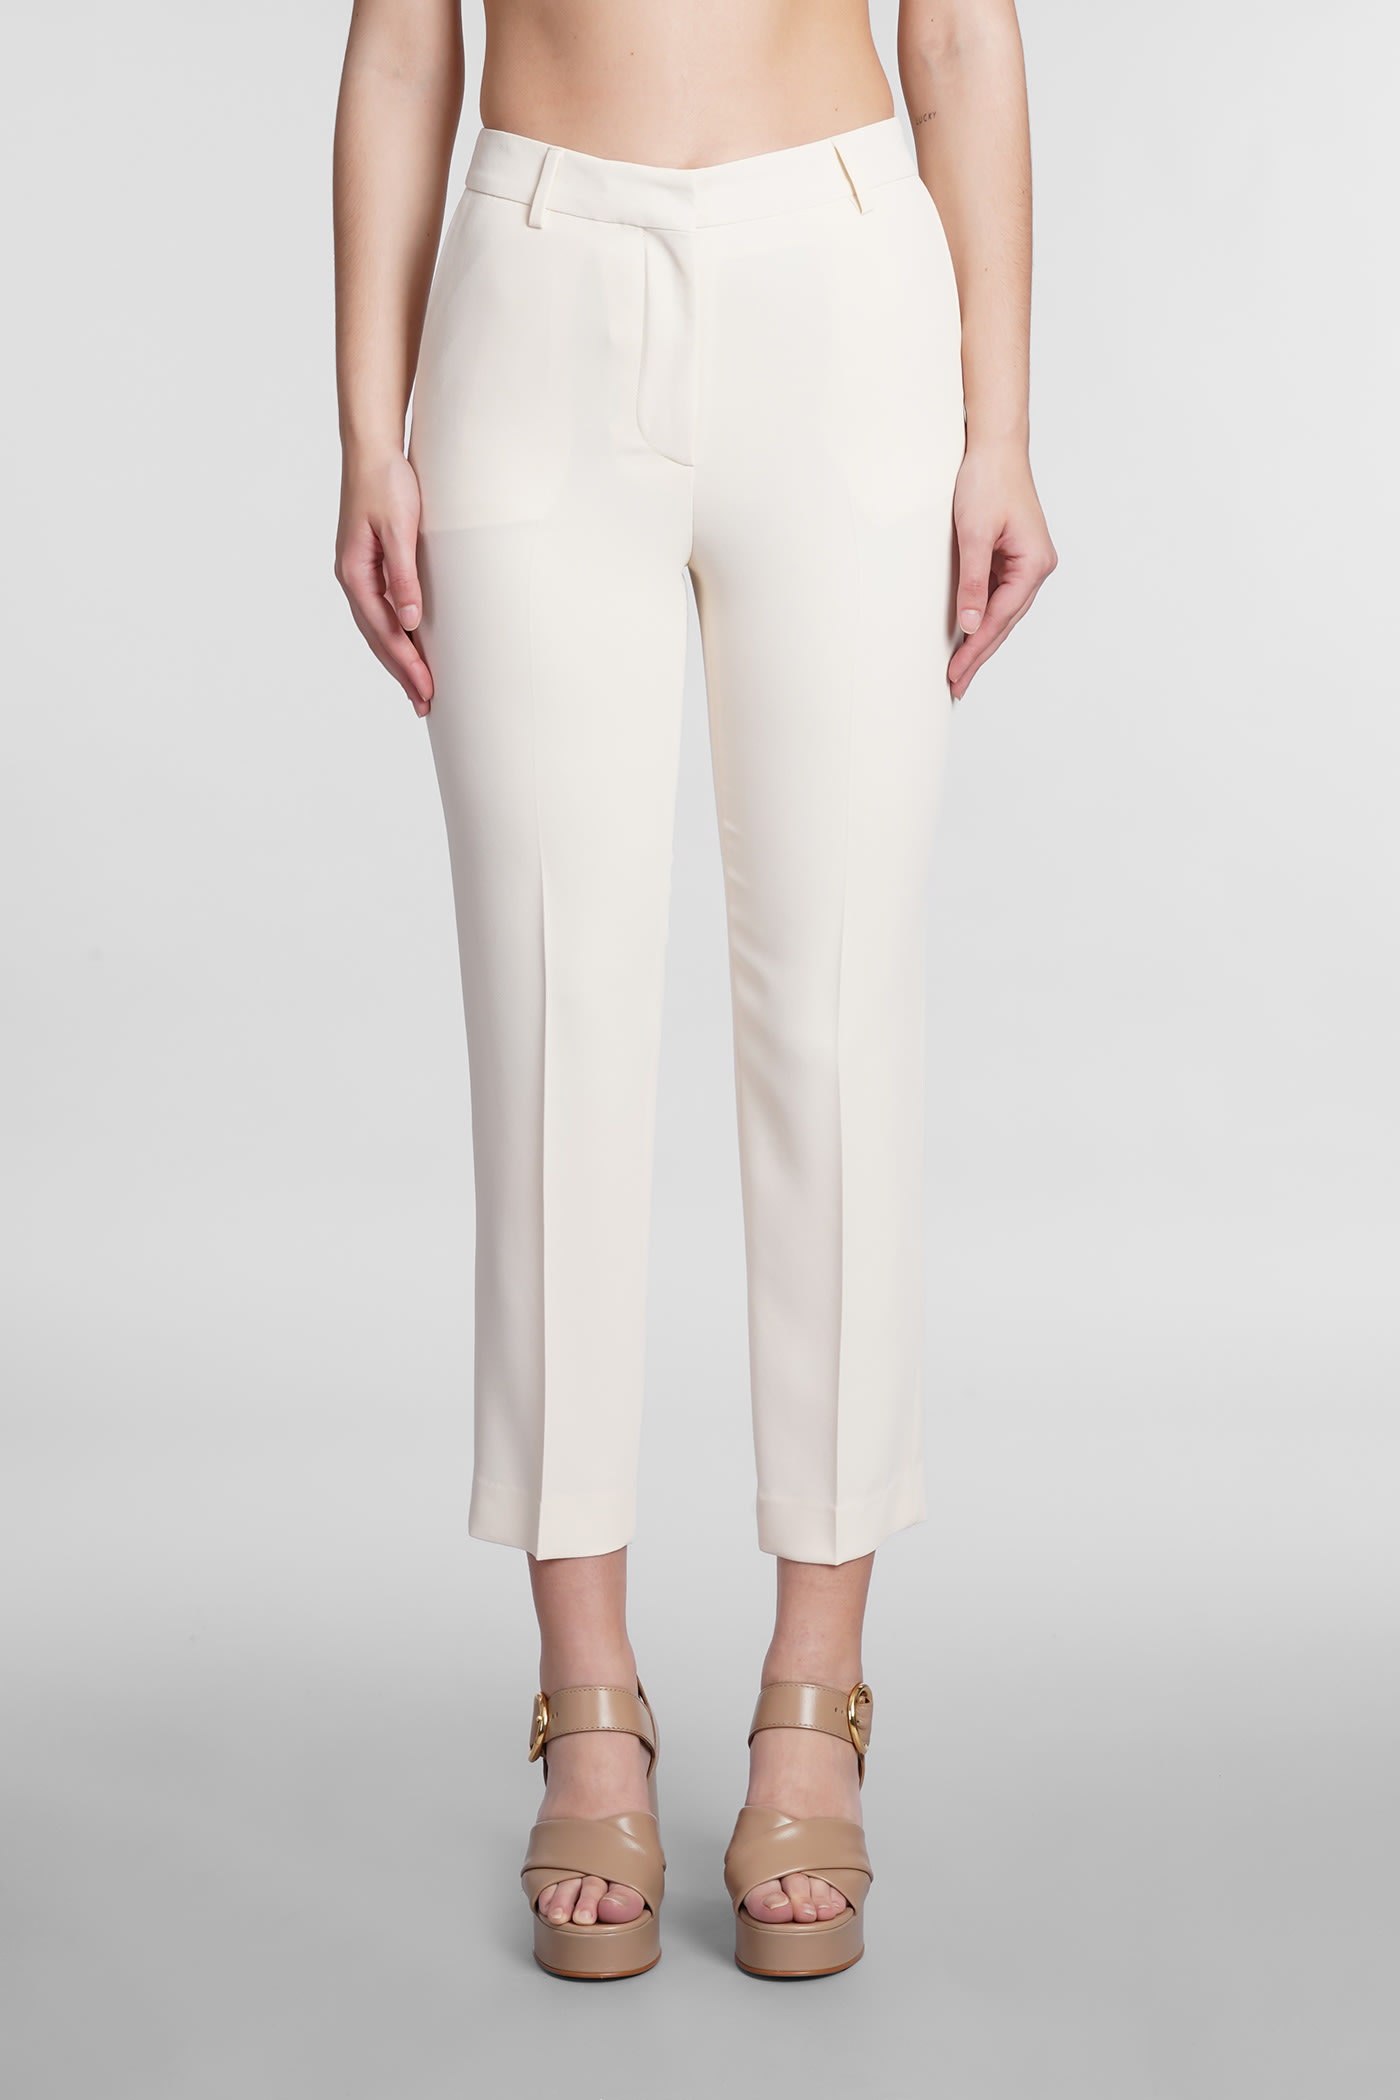 See By Chloé Pants In Beige Cotton In White